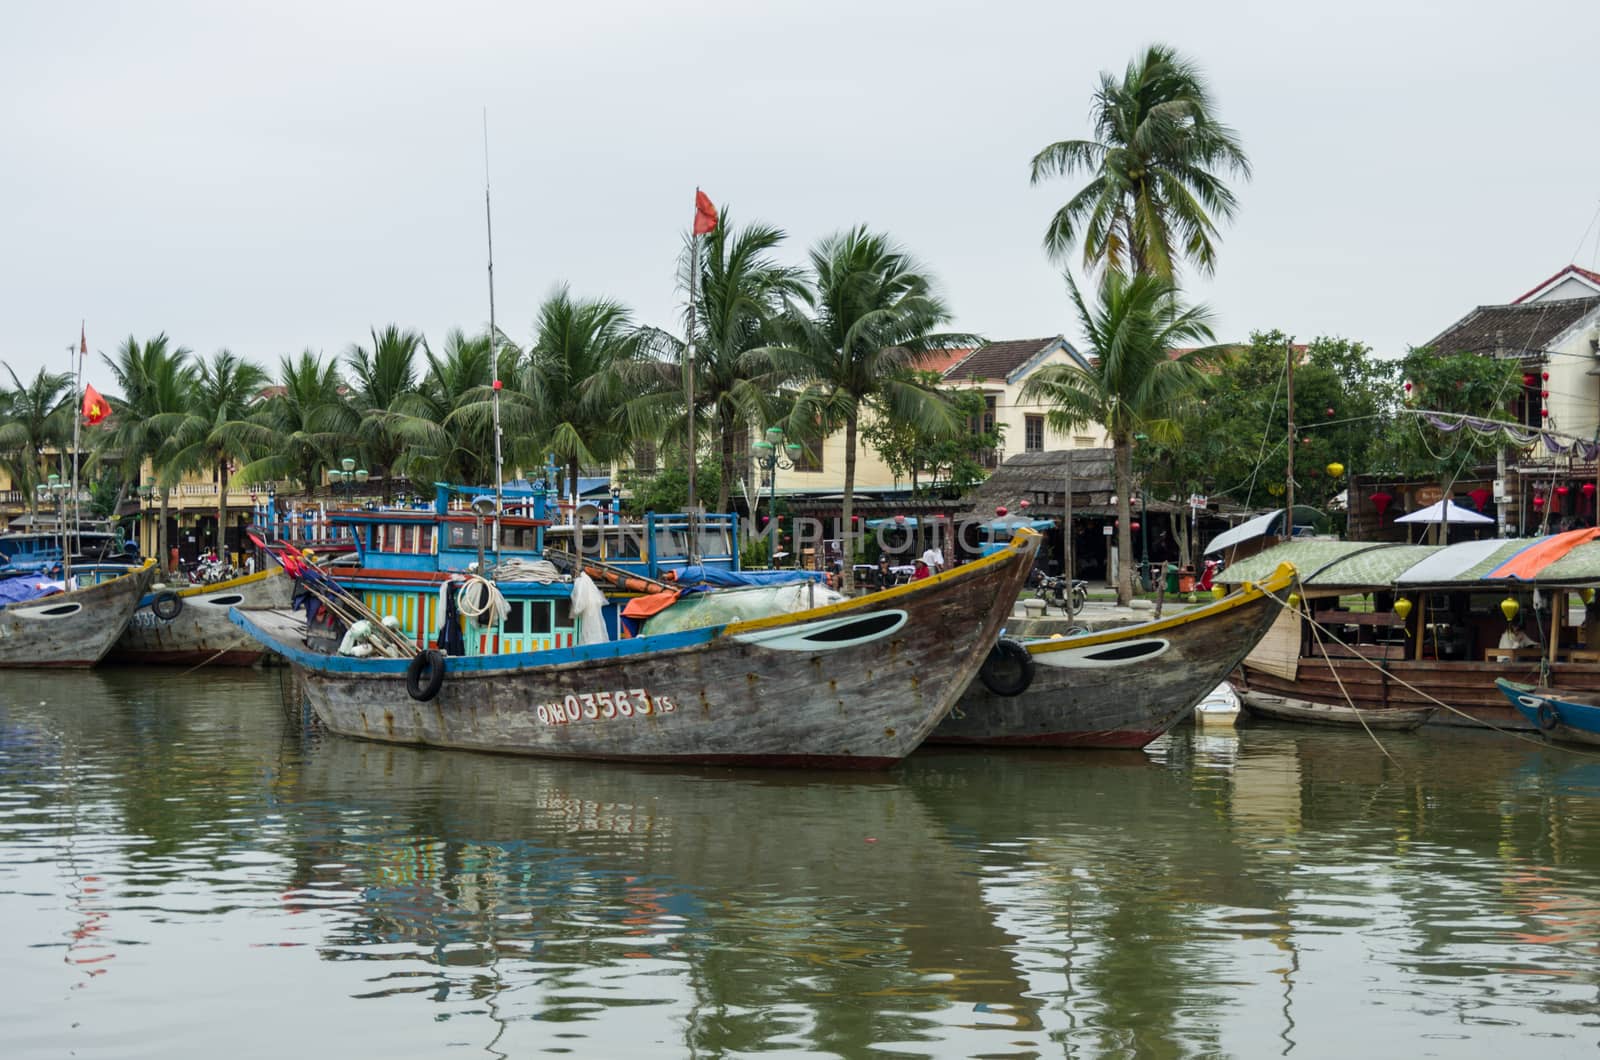 HOI AN, VIETNAM - January  7, 2015: Traditional boats in Hoi An. Hoi An is the World's Cultural heritage site, famous for mixed cultures & architecture.